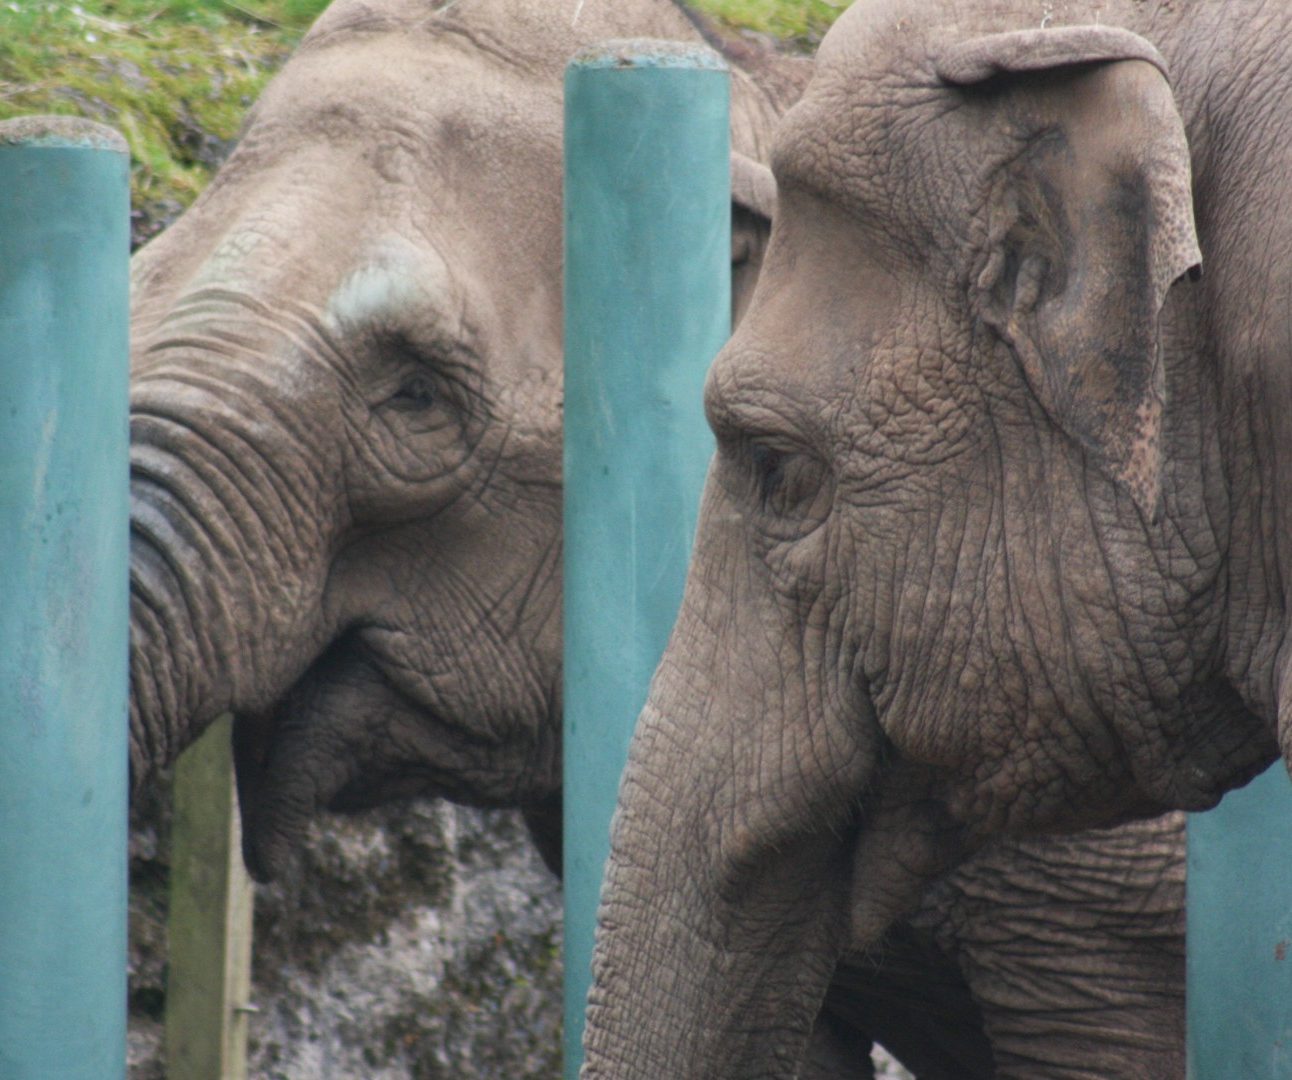 Two Asian elephants in a zoo enclosure